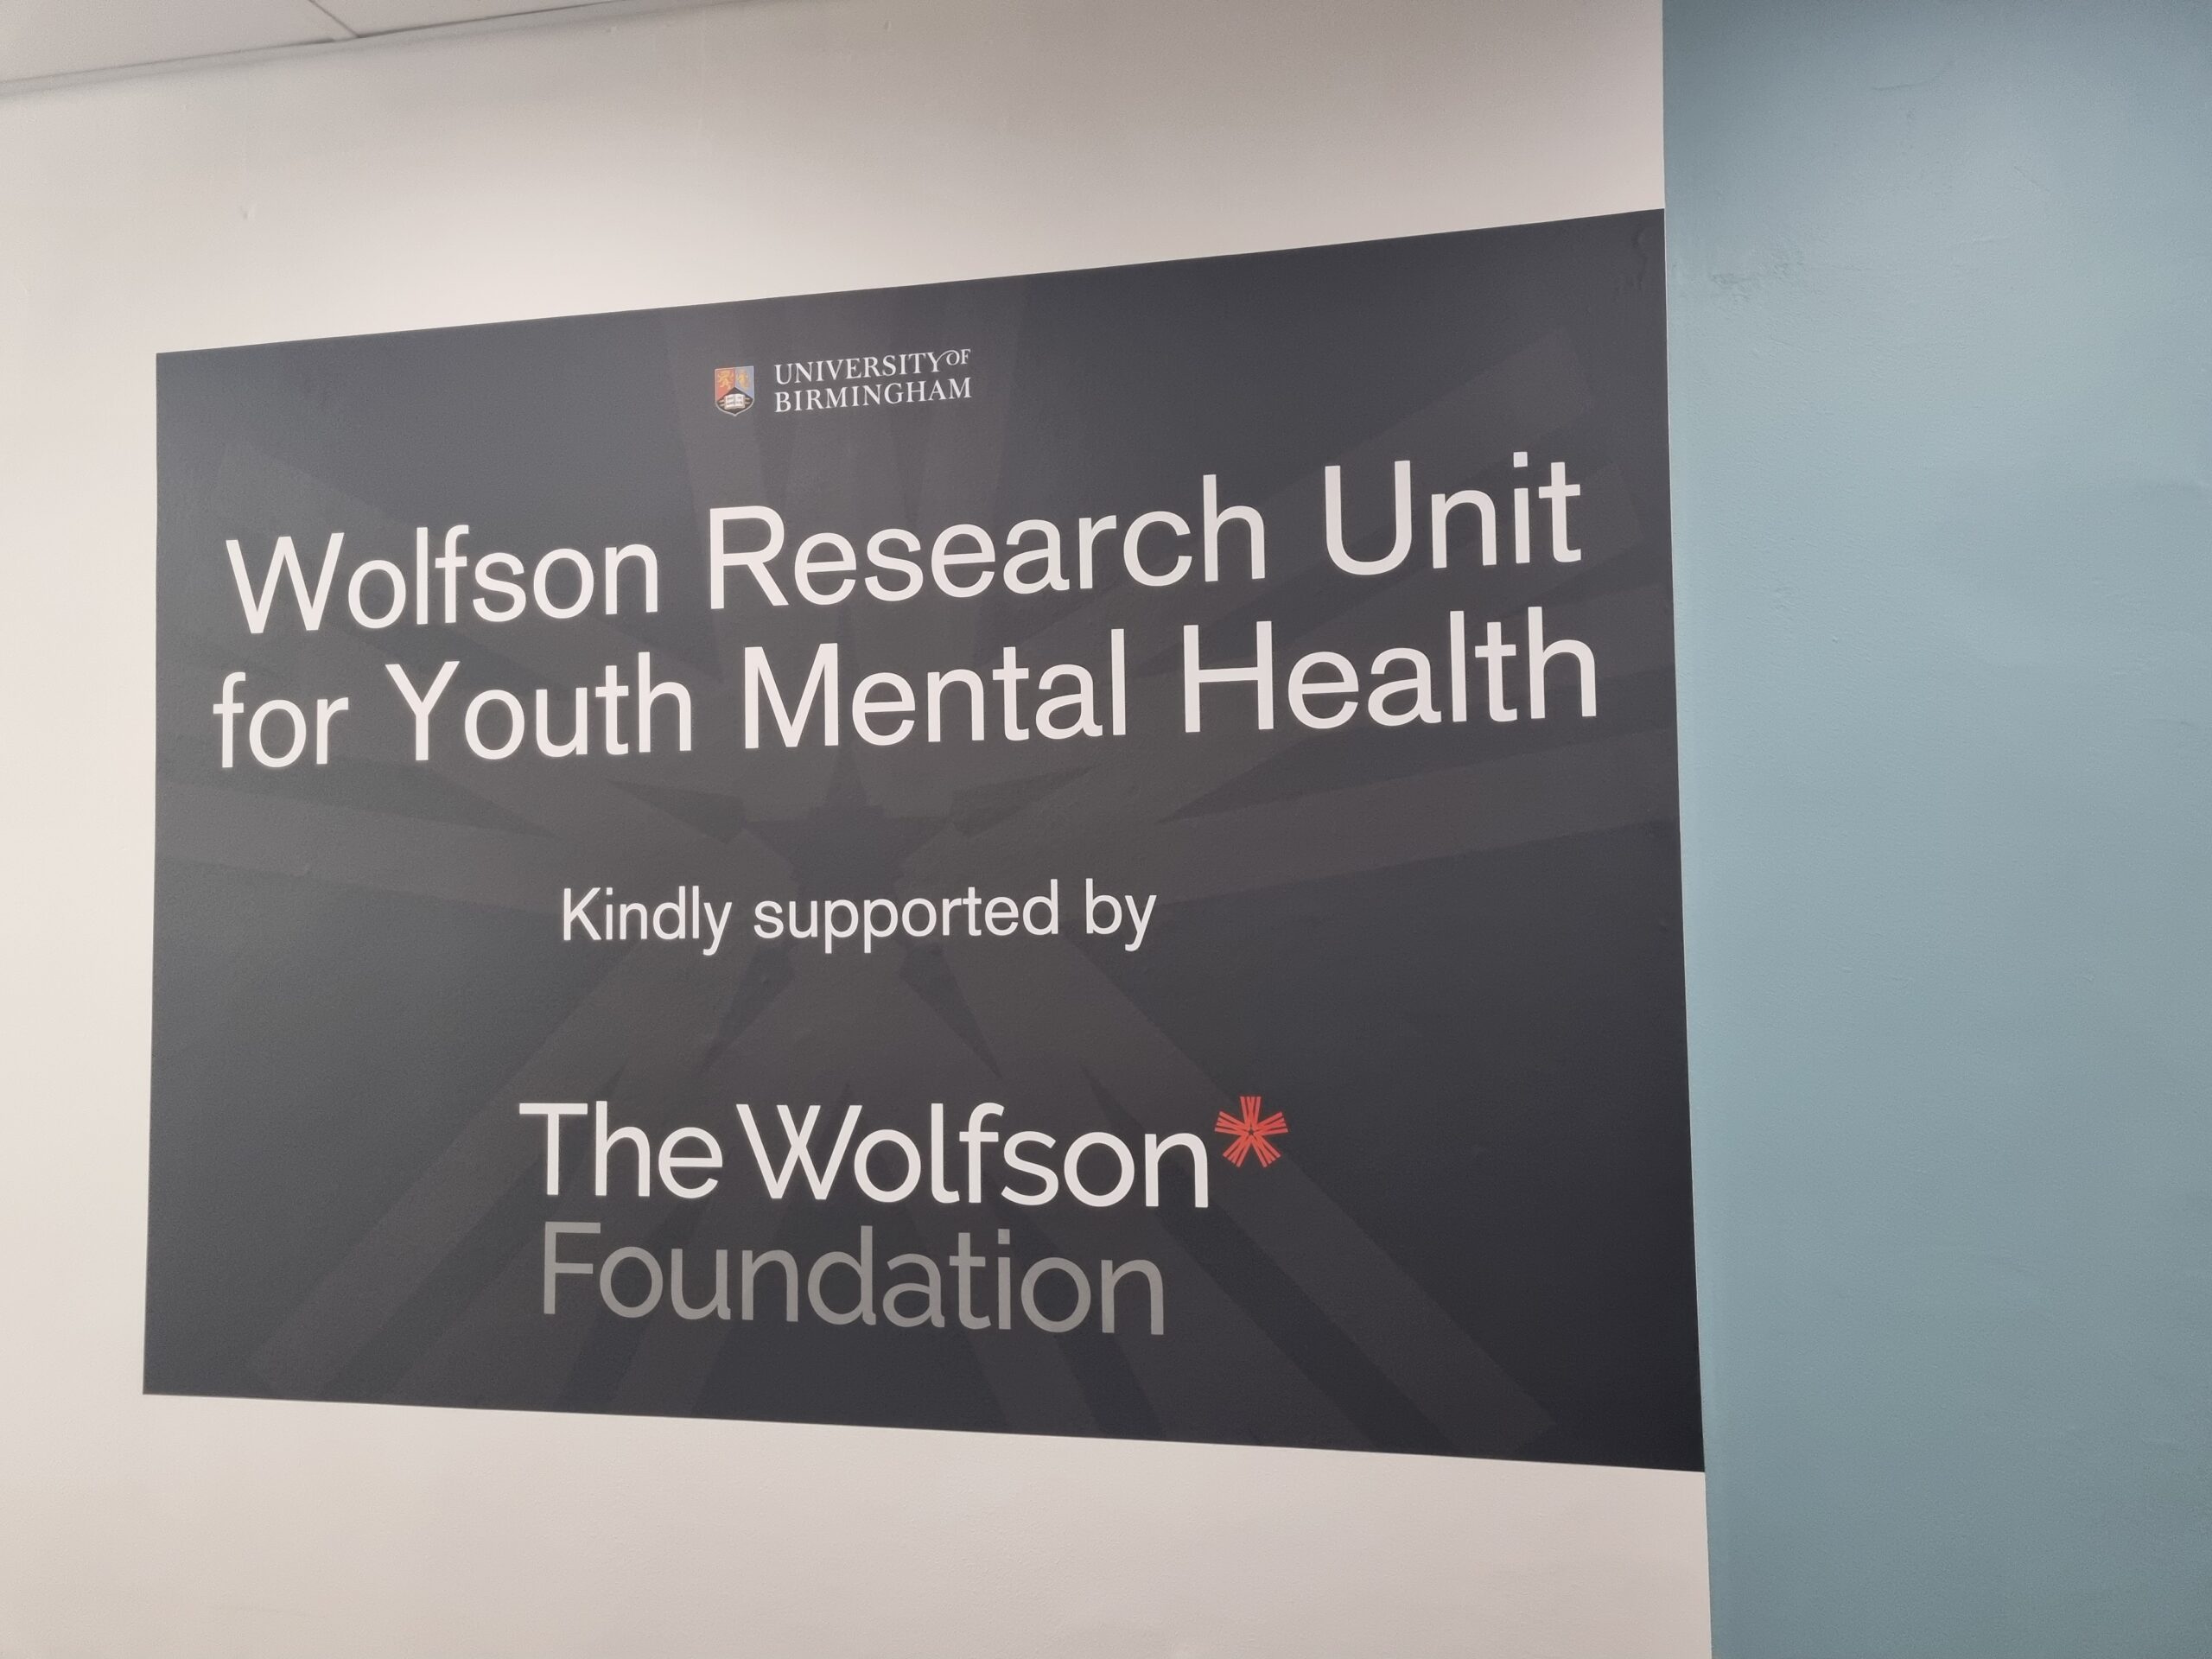 Signage in the Wolfson Research Unit for Youth Mental Health.